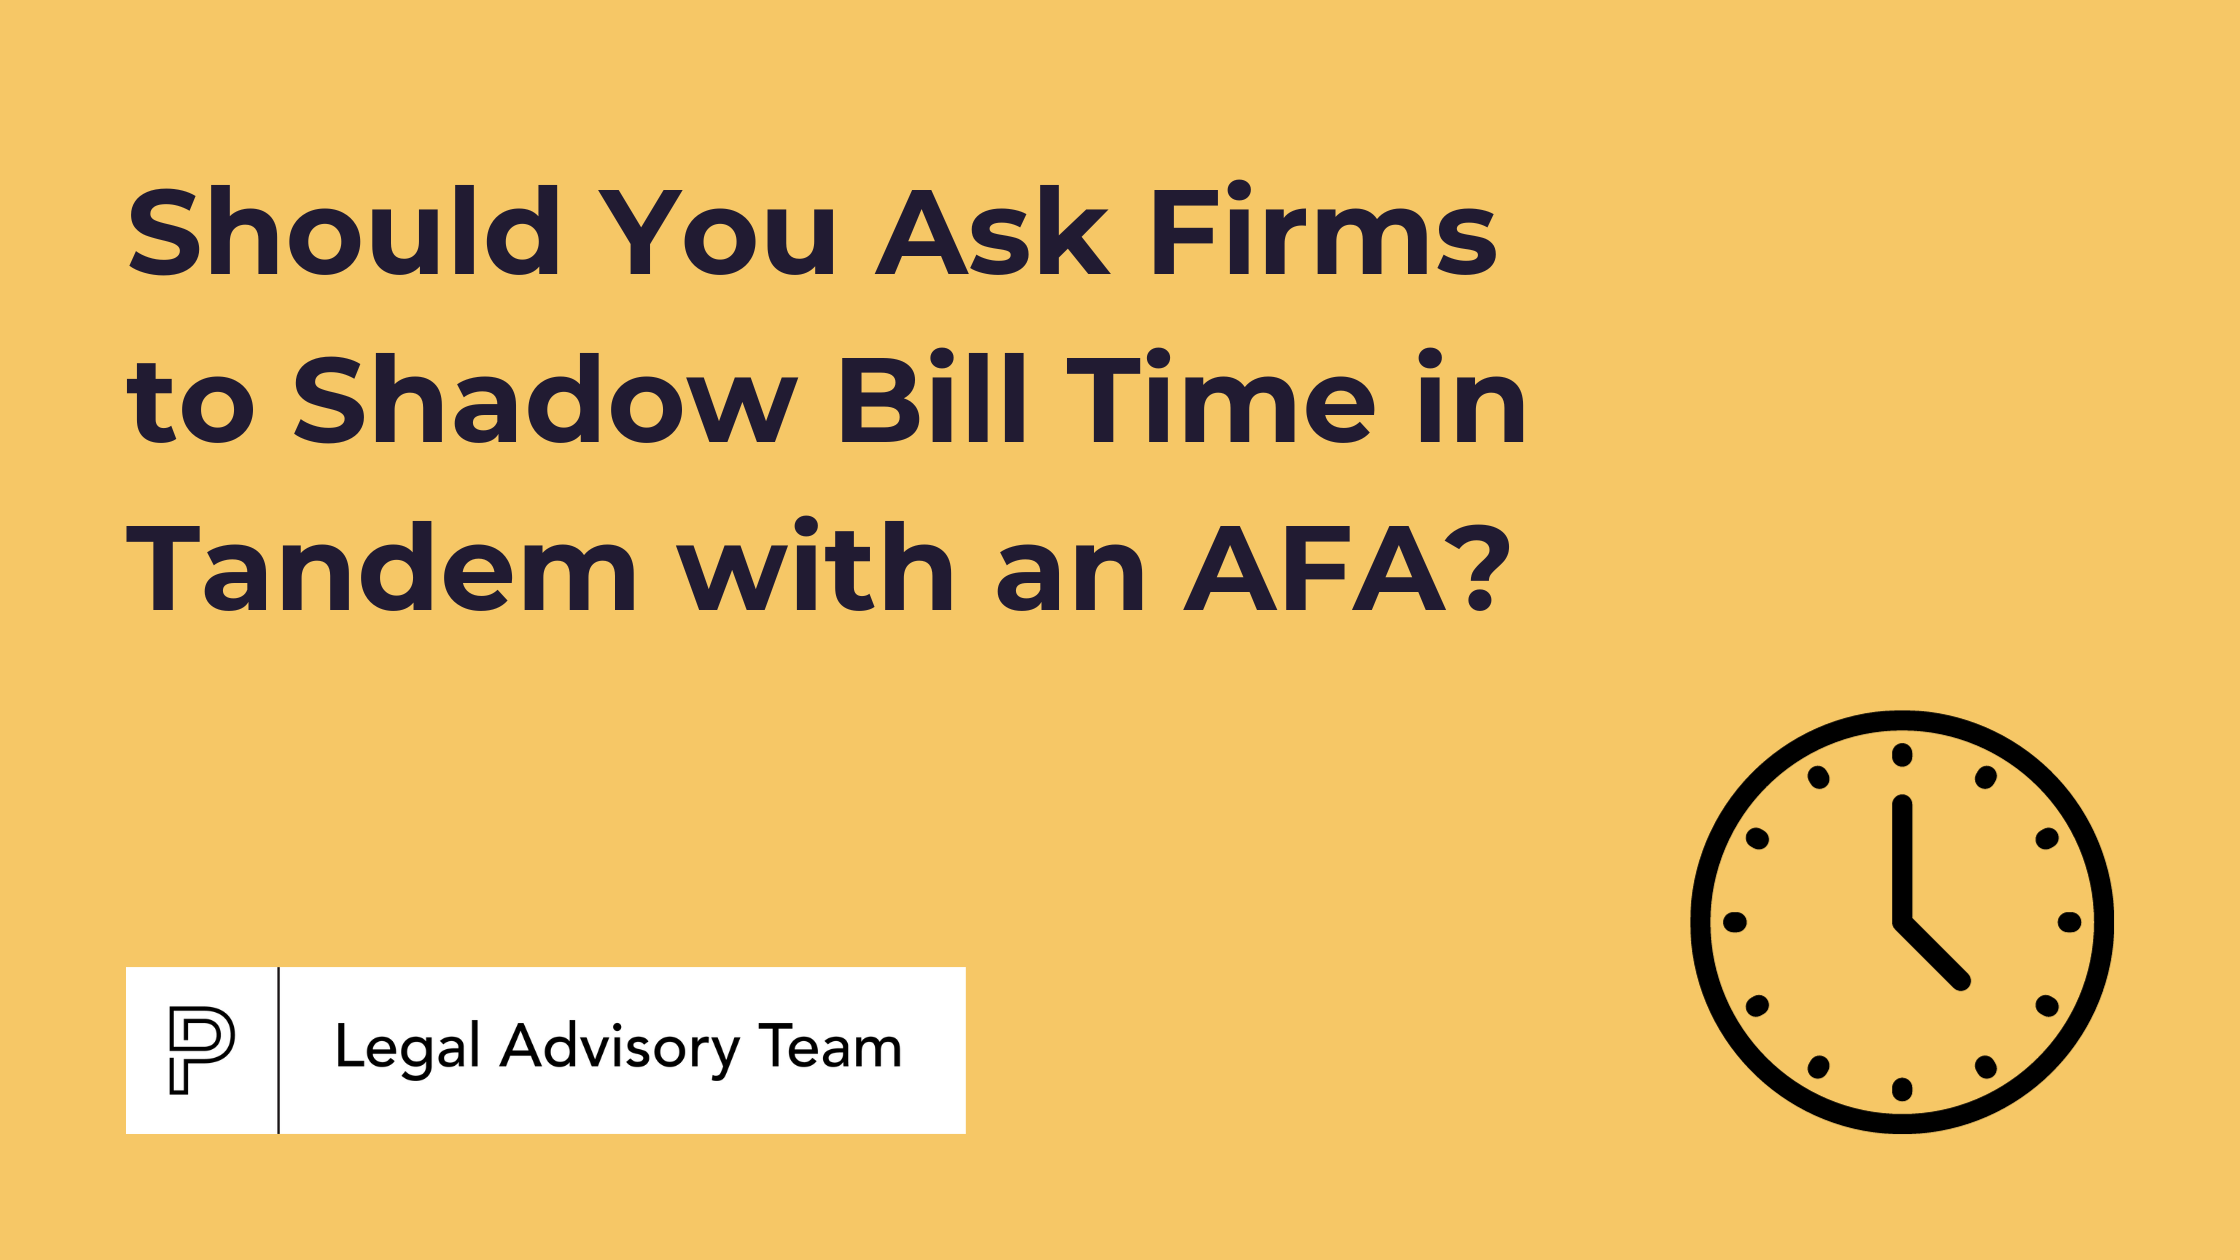 Should You Ask Firms to Shadow Bill Time in Tandem with an AFA?